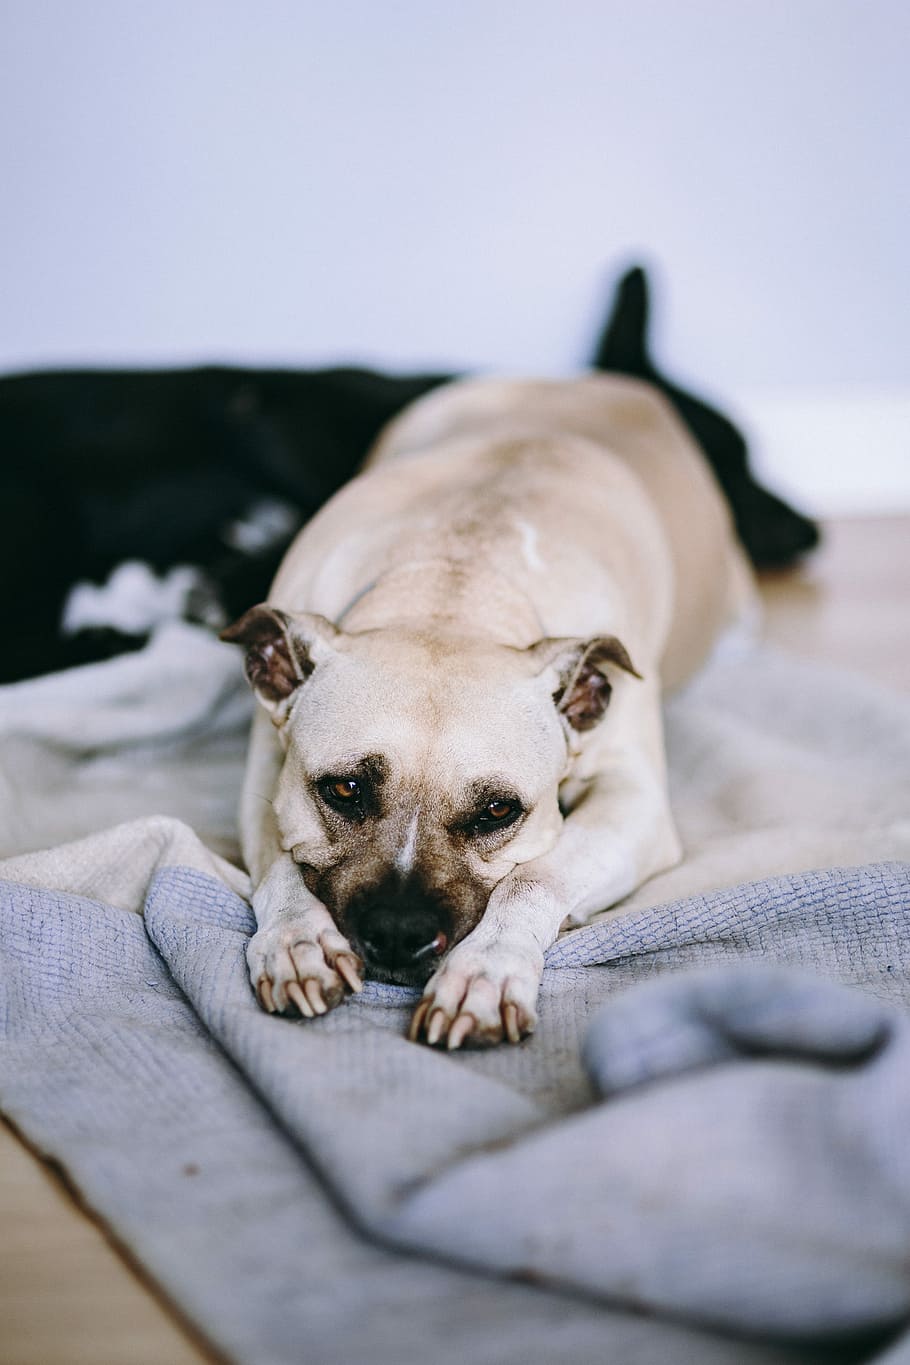 cute, dog, laying, bed, Old, old dog, amstaff, American staffordshire terrier, pet, animal